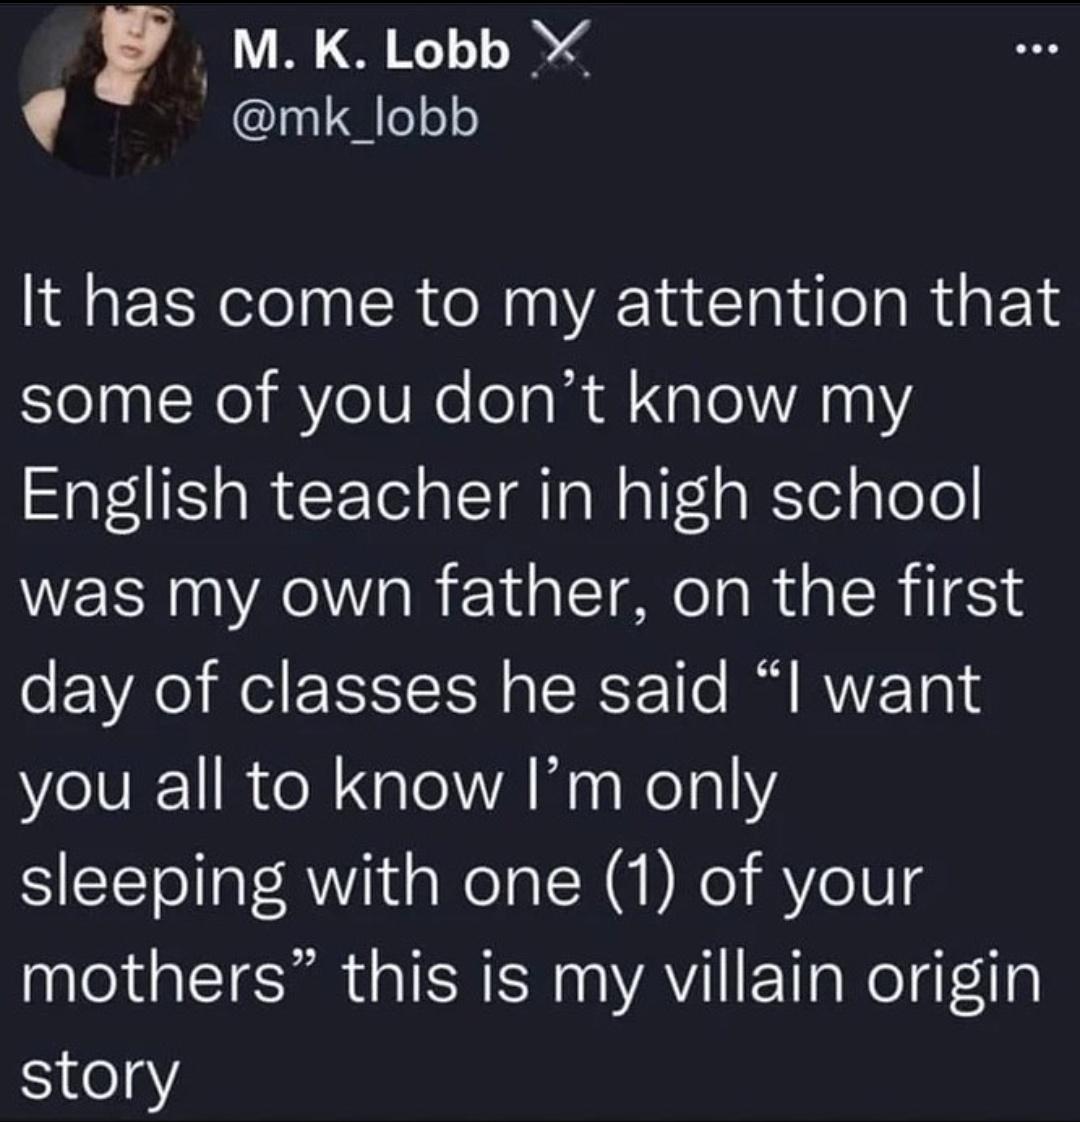 funny tweets - Autistic child - M. K. Lobb X. It has come to my attention that some of you don't know my English teacher in high school was my own father, on the first day of classes he said "I want you all to know I'm only sleeping with one 1 of your mot